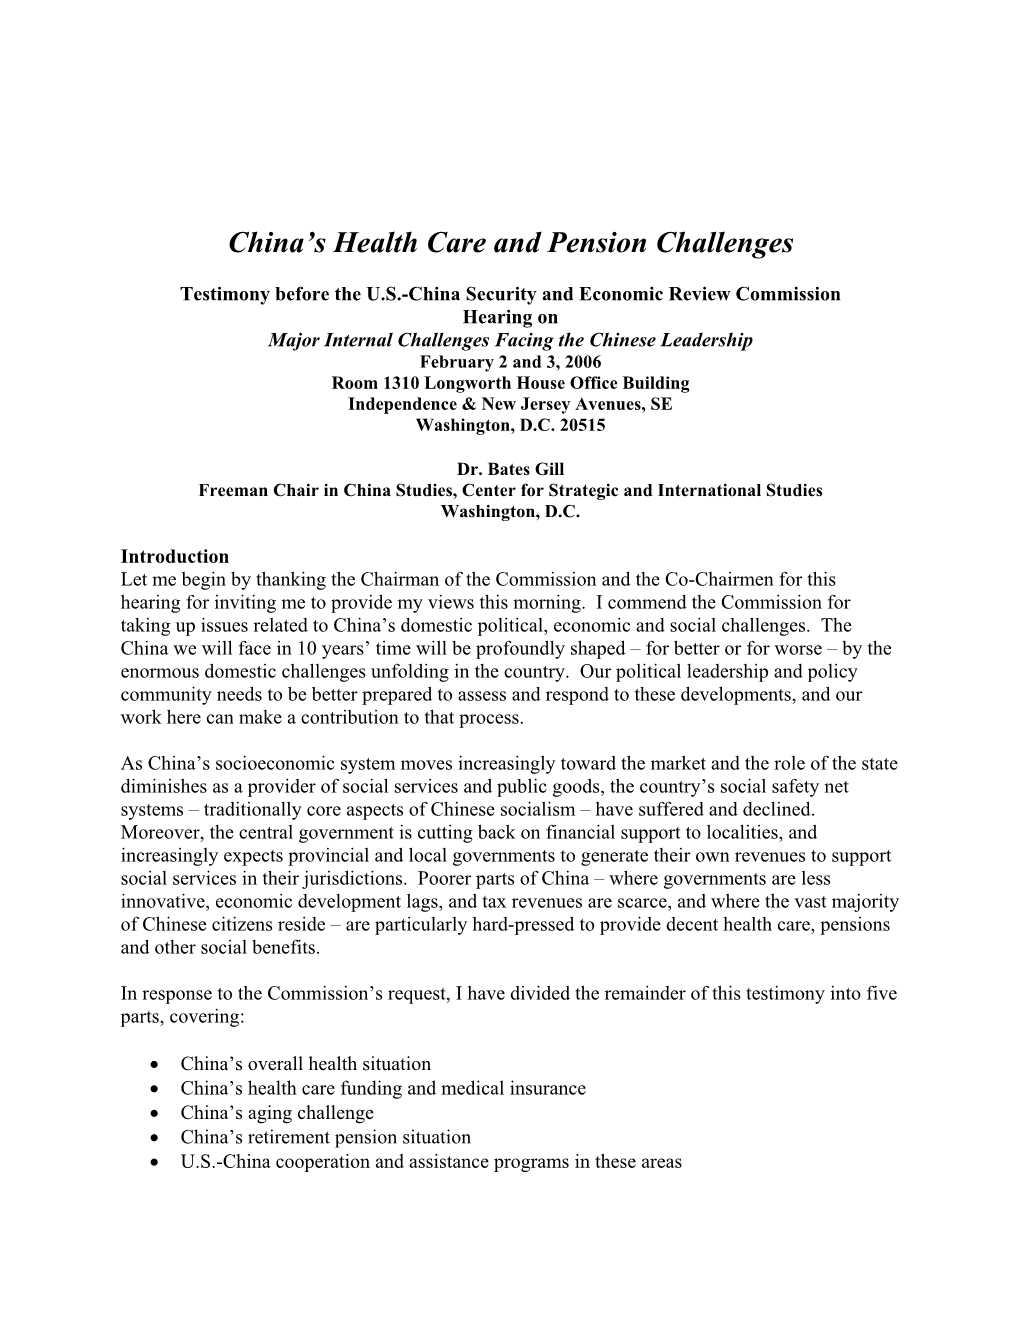 China's Health Care and Pension Challenges